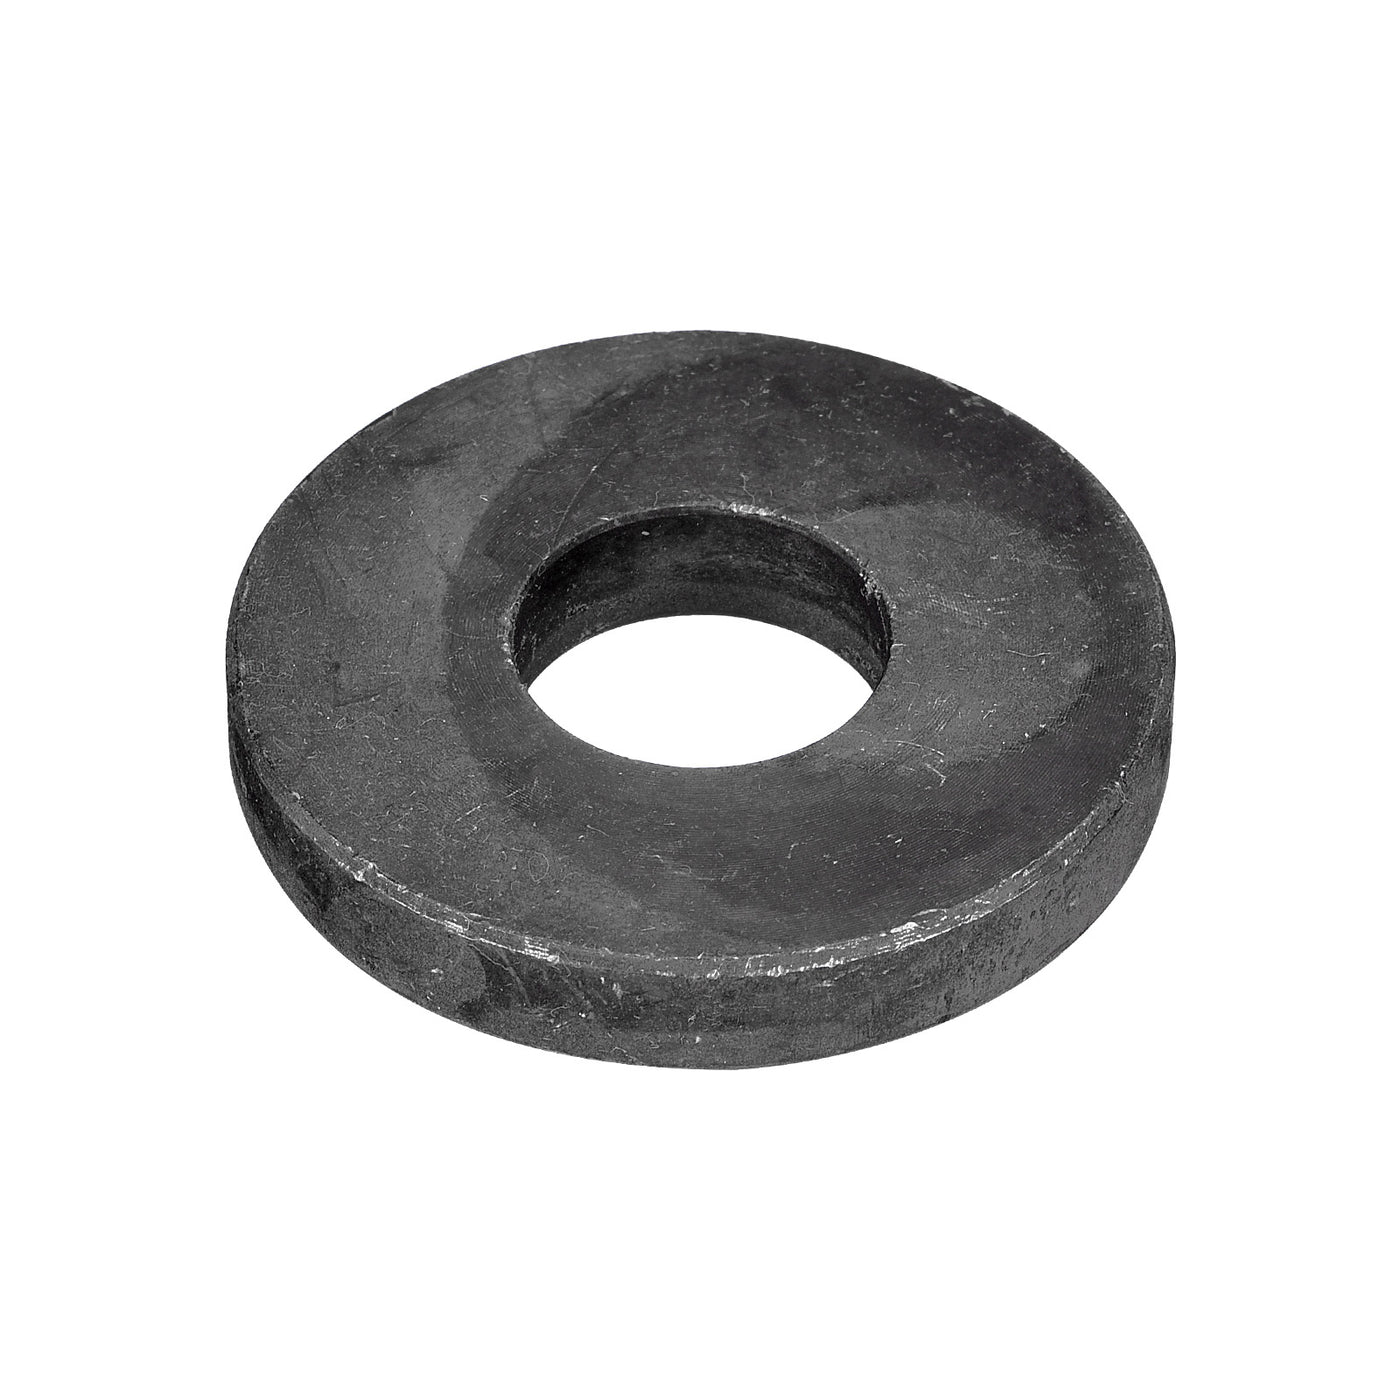 uxcell Uxcell M20 Carbon Steel Flat Washer 20x52x8mm Grade 8.8 Alloy Steel Fasteners